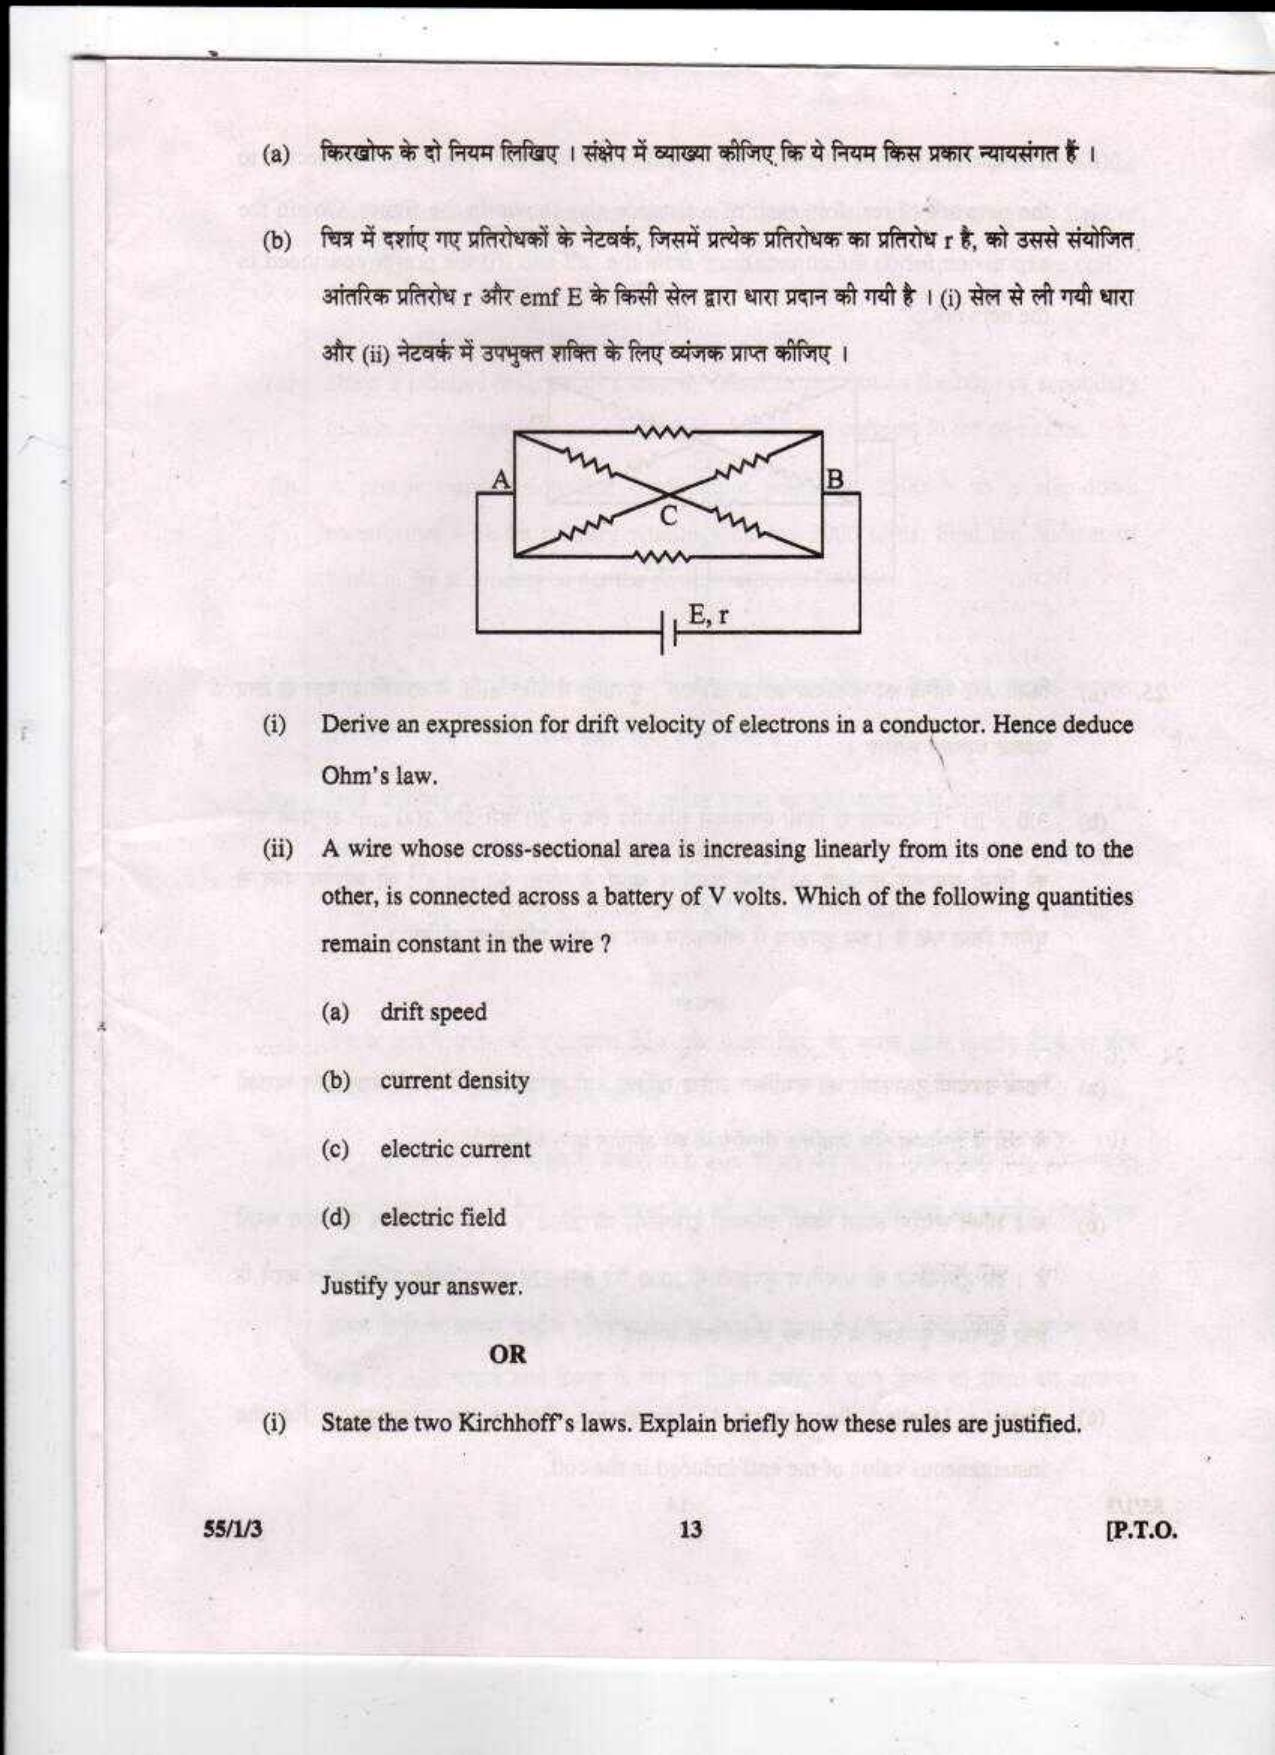 CBSE Class 12 Physics (Theory) SET 3-Delhi-12 2017 Question Paper - Page 13